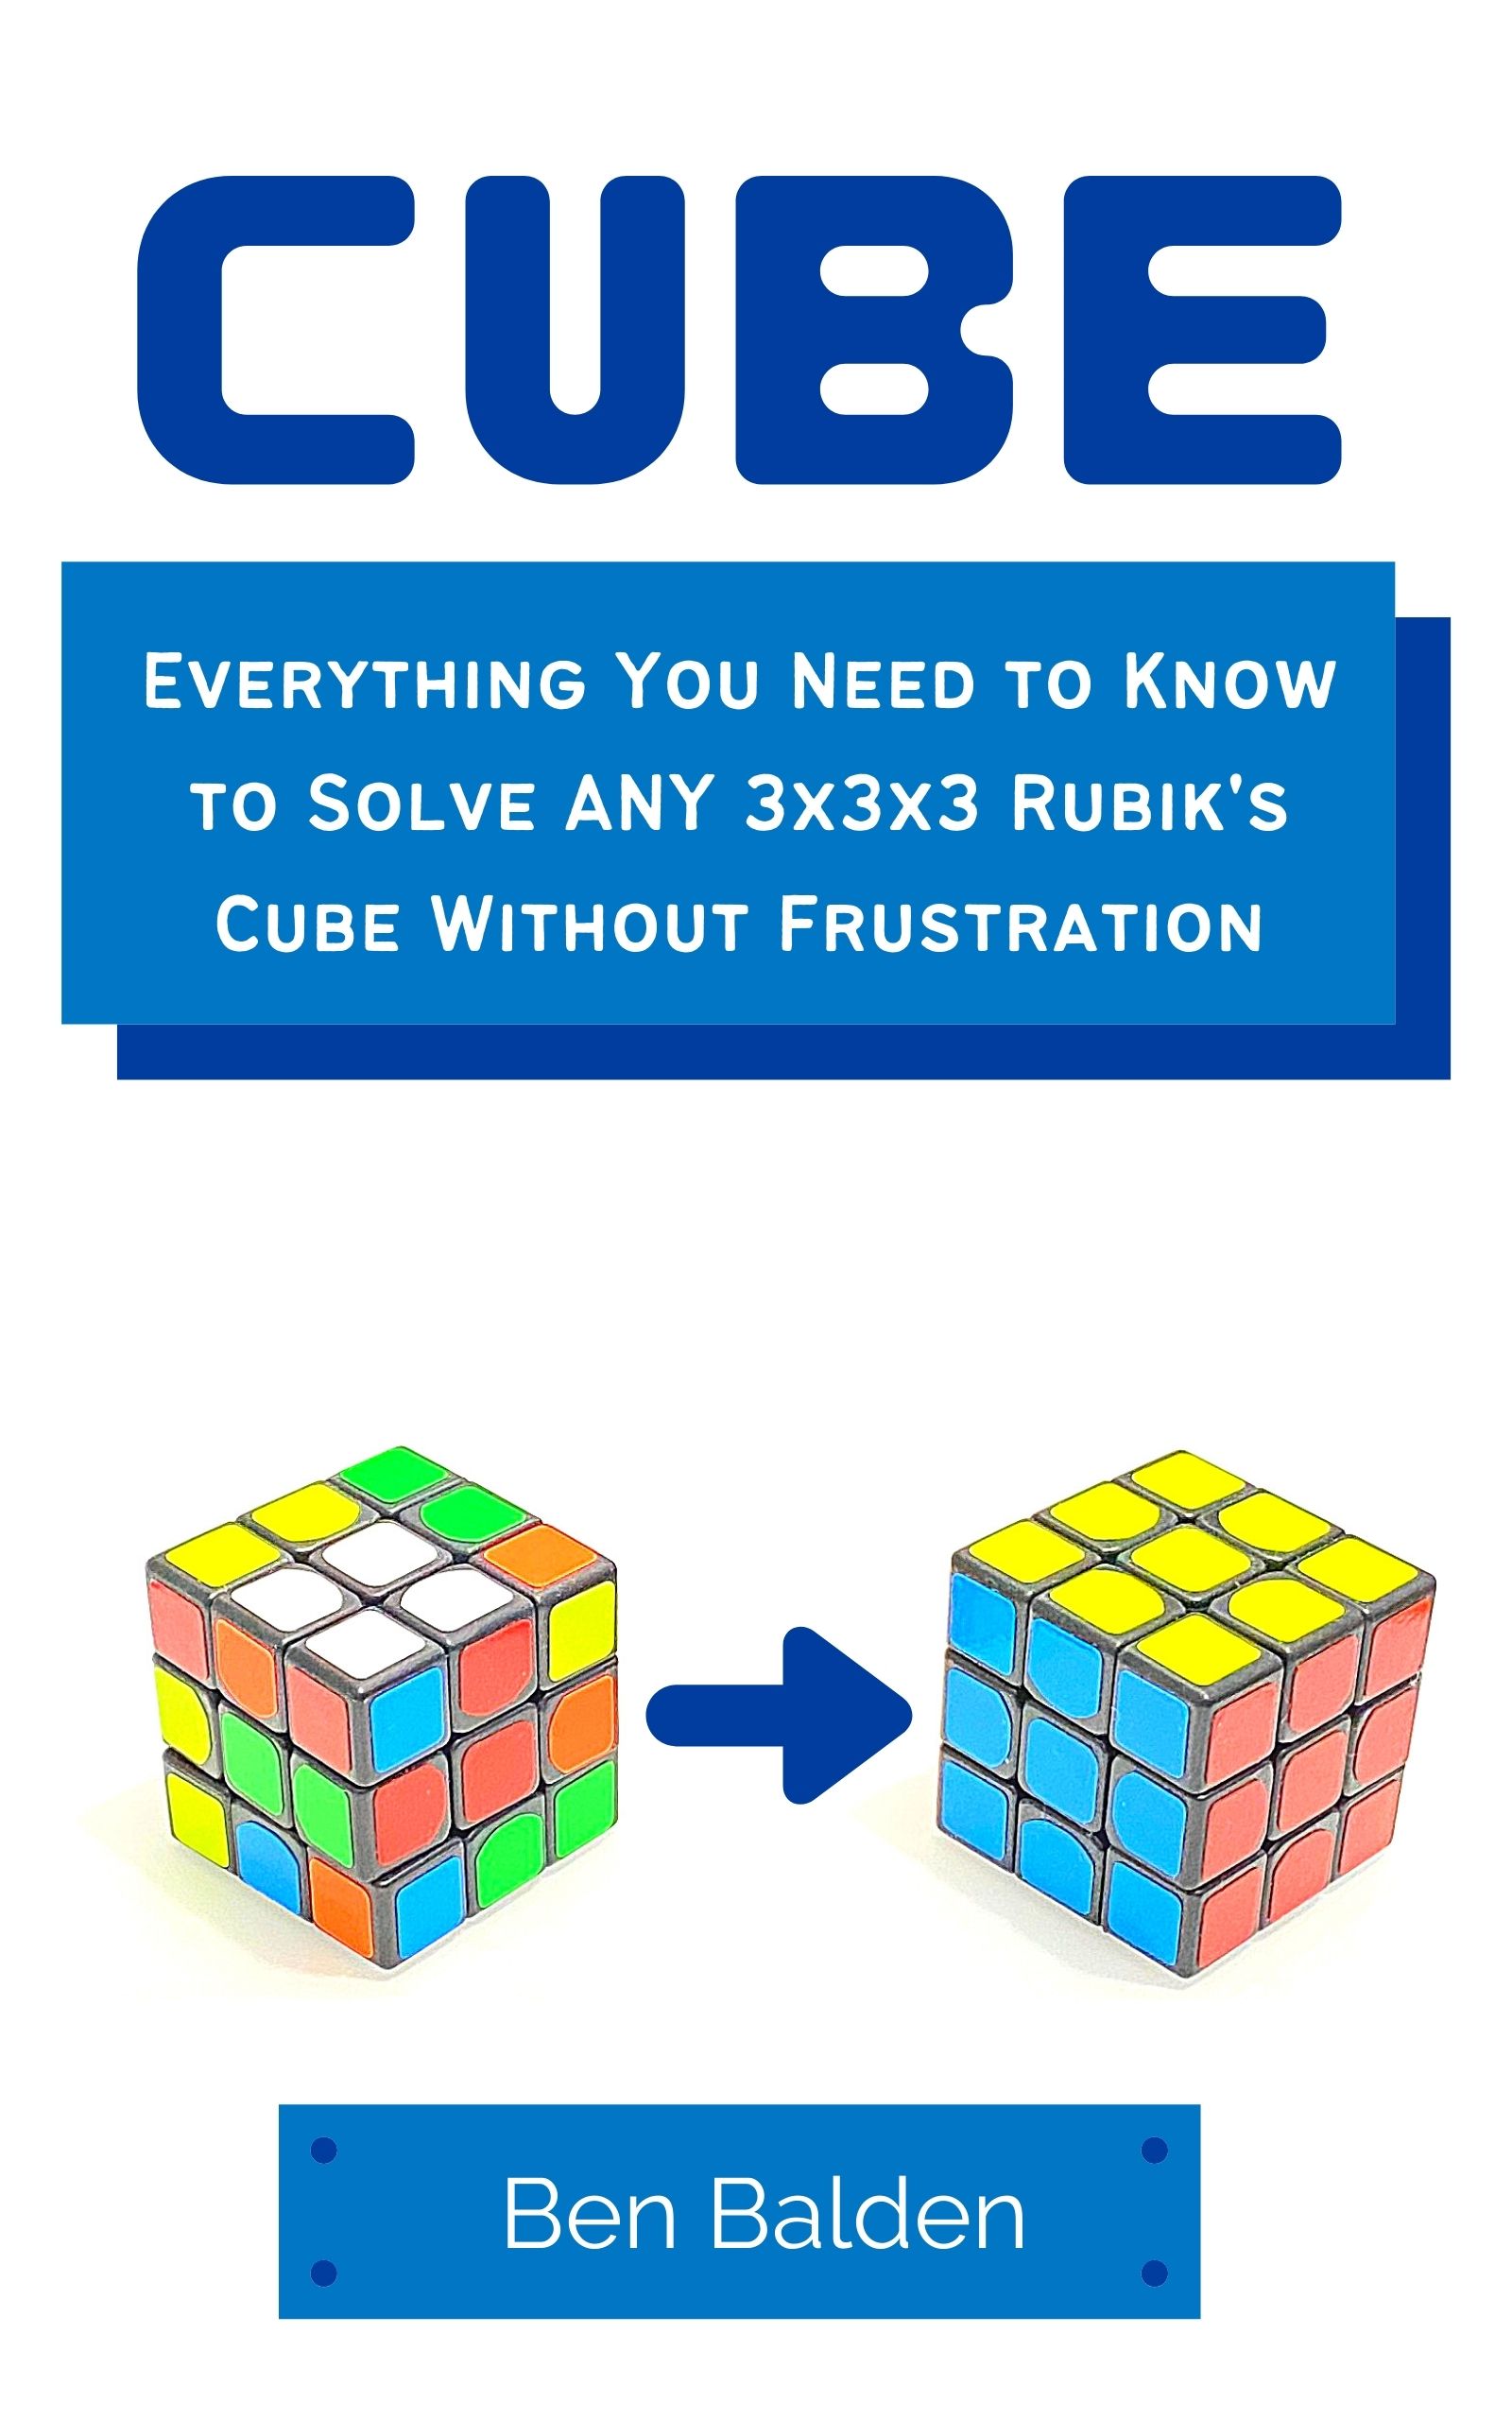 The Algorithm to Solve Rubik's Cube - Cracked and Explained